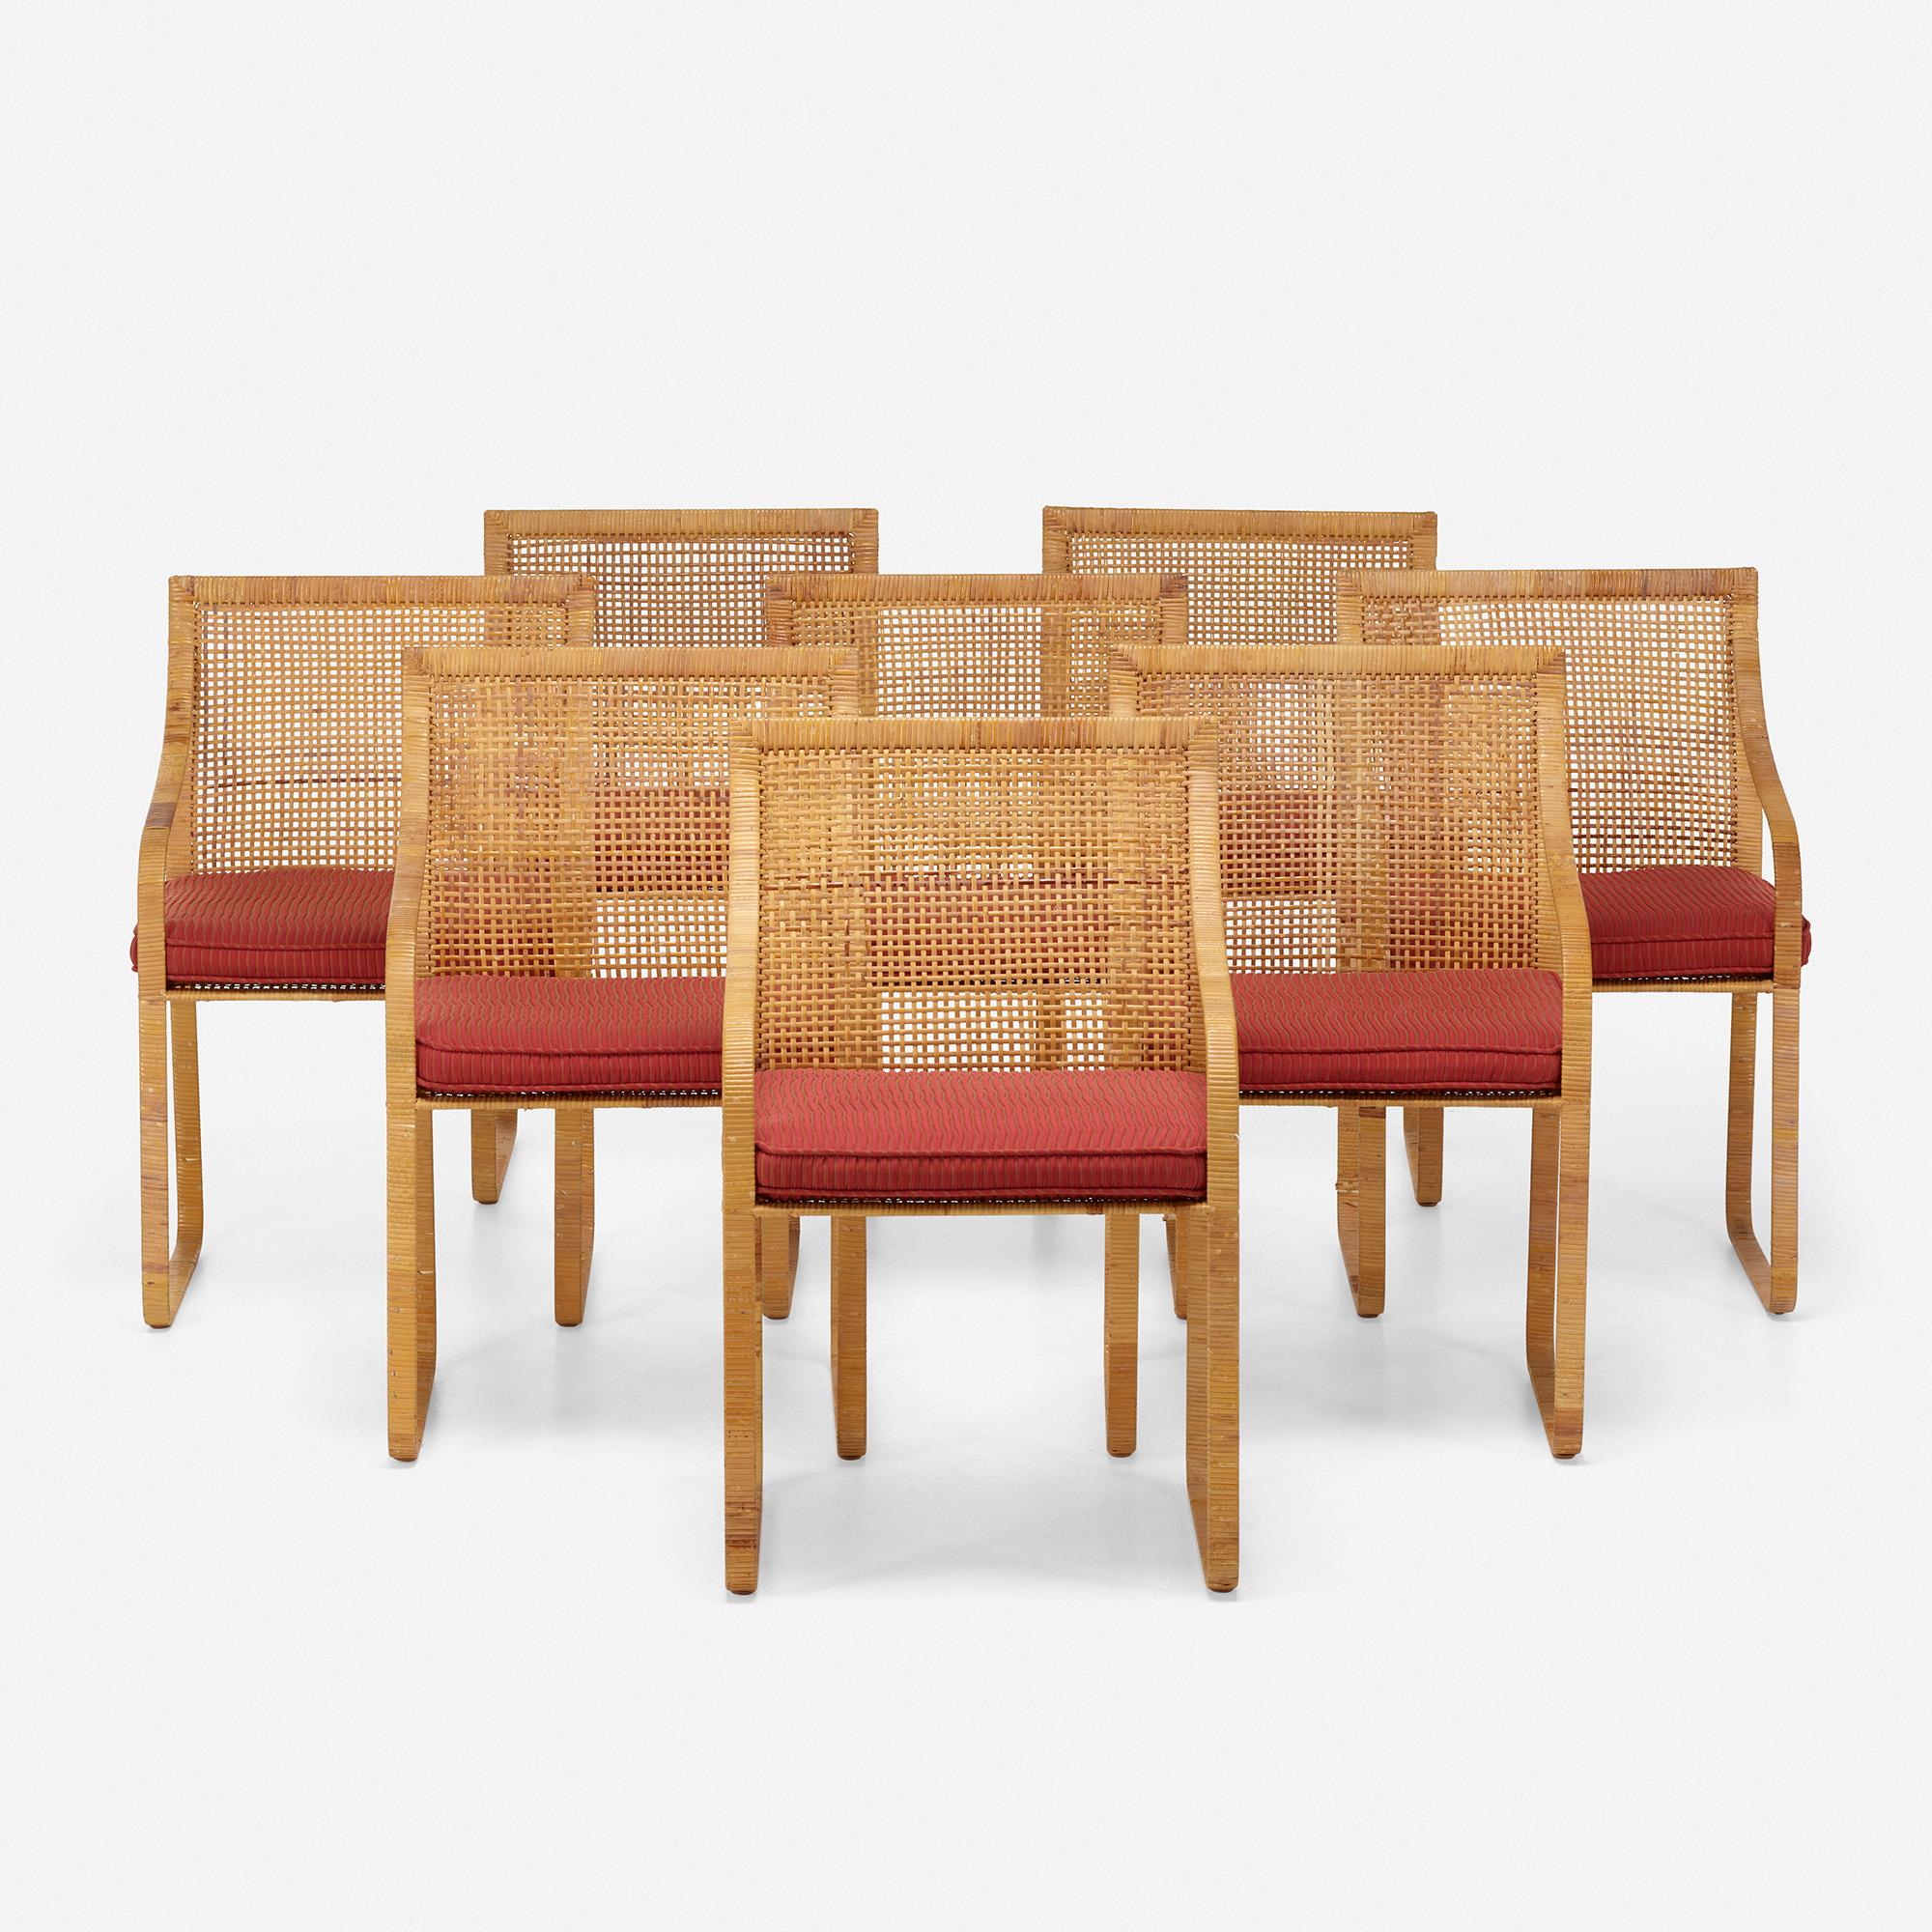 Made by: Harvey Probber, Inc., USA, c. 1975

Material: woven latania over steel, upholstery

Size: 21.5 W × 20 D × 35 H in seat height 19.75 inches

Description: Classique dining chairs model 8071C from the Artisan Collection.